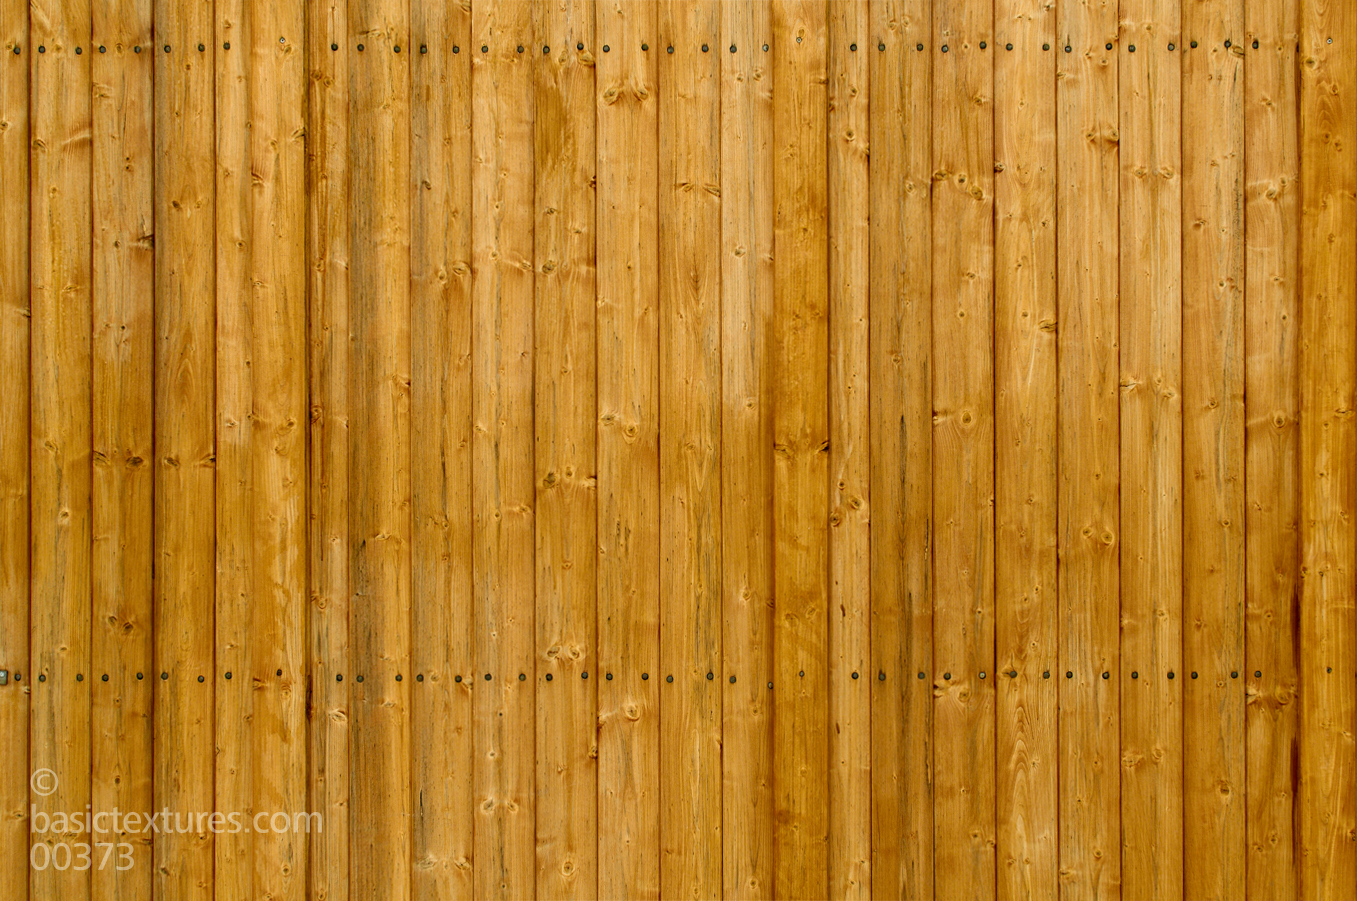 Wood Planks Wall Moist Image For Textures Background